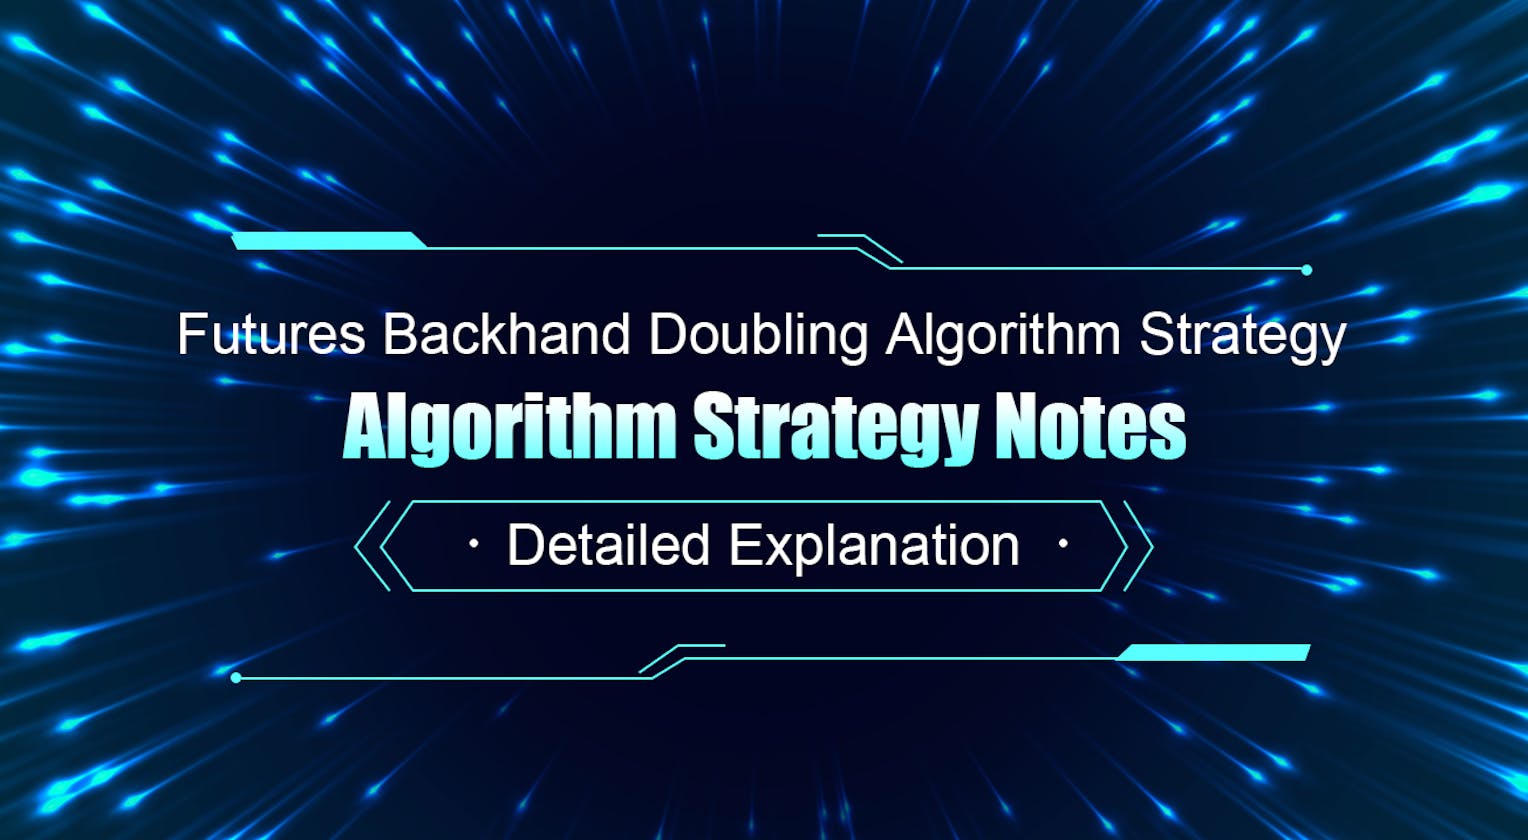 Detailed Explanation of Futures Backhand Doubling Algorithm Strategy Notes